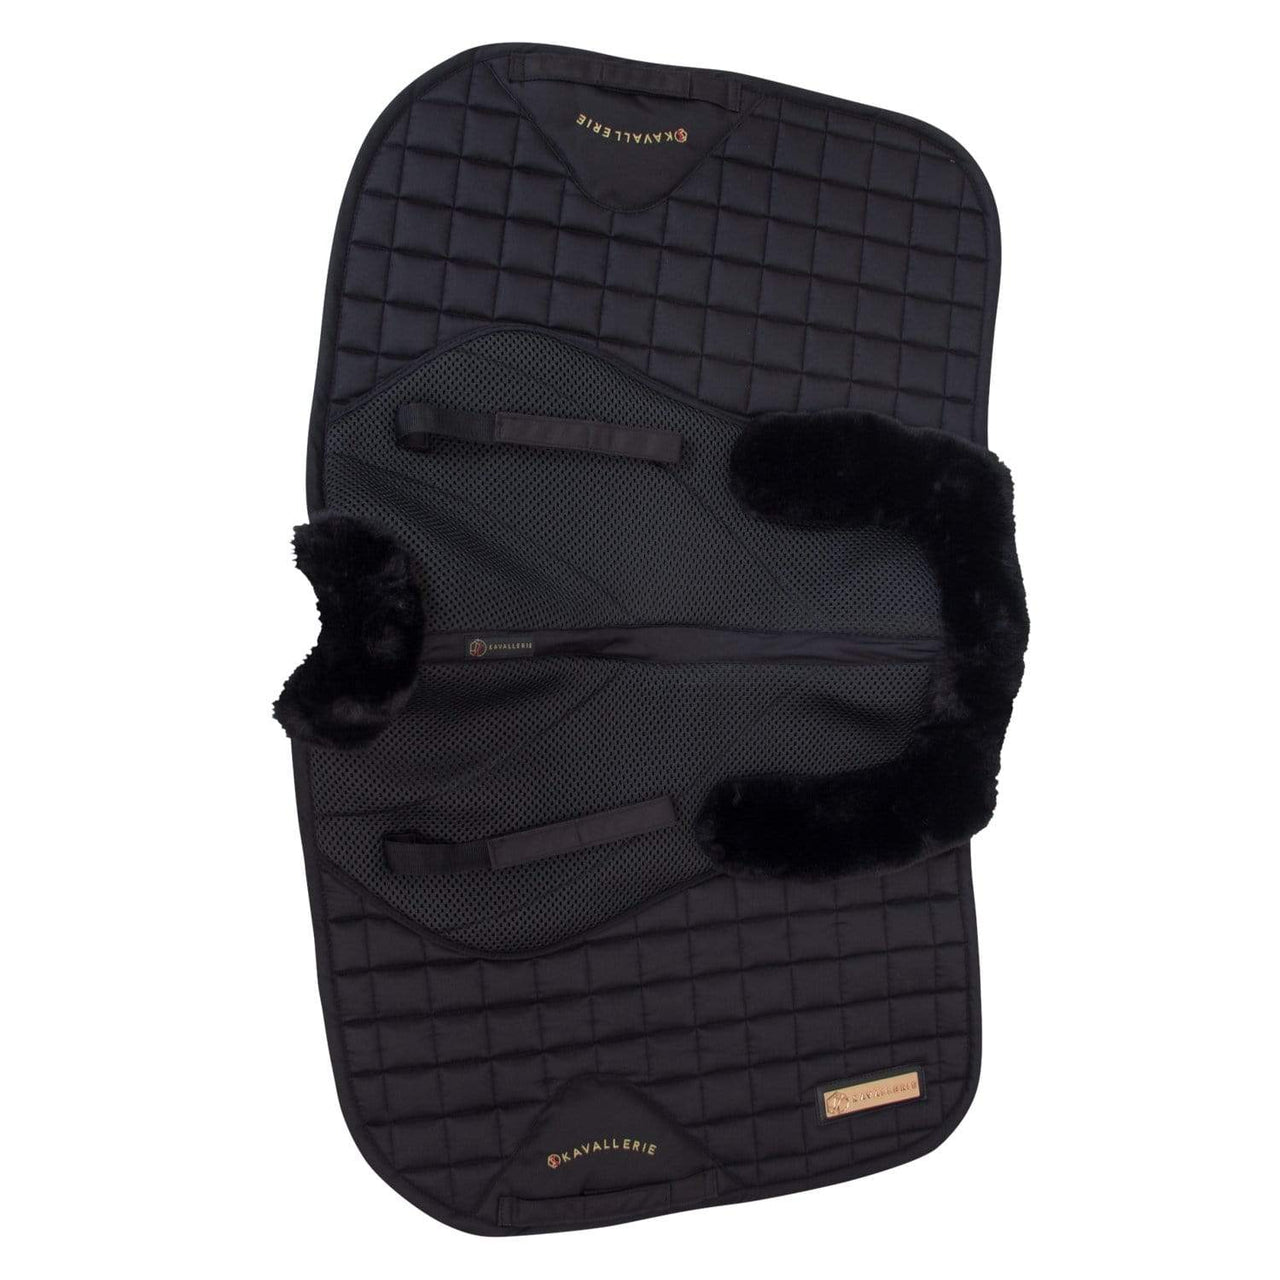 Full 3D Mesh with Fur Saddle Pad - Kavallerie